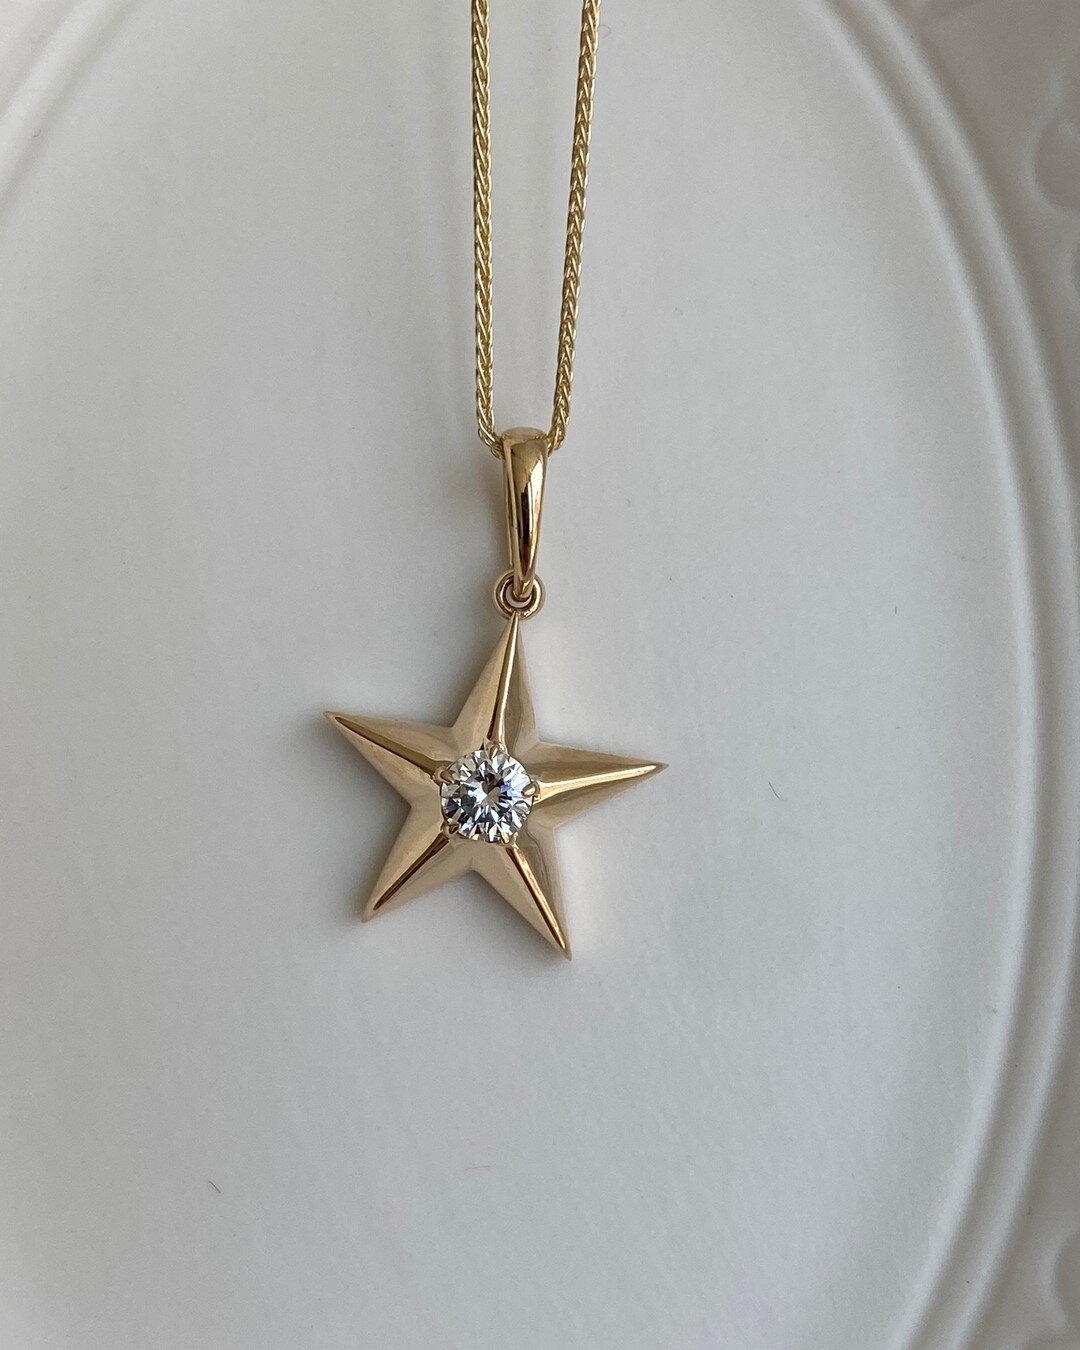 You're a star 💫 ⠀⠀⠀⠀⠀⠀⠀⠀⠀
⠀⠀⠀⠀⠀⠀⠀⠀⠀
Custom diamond and star pendant. Shhh it's a surprise 🤫 ! Yellow gold with a central diamond - the perfect everyday reminder to shine bright you star you!